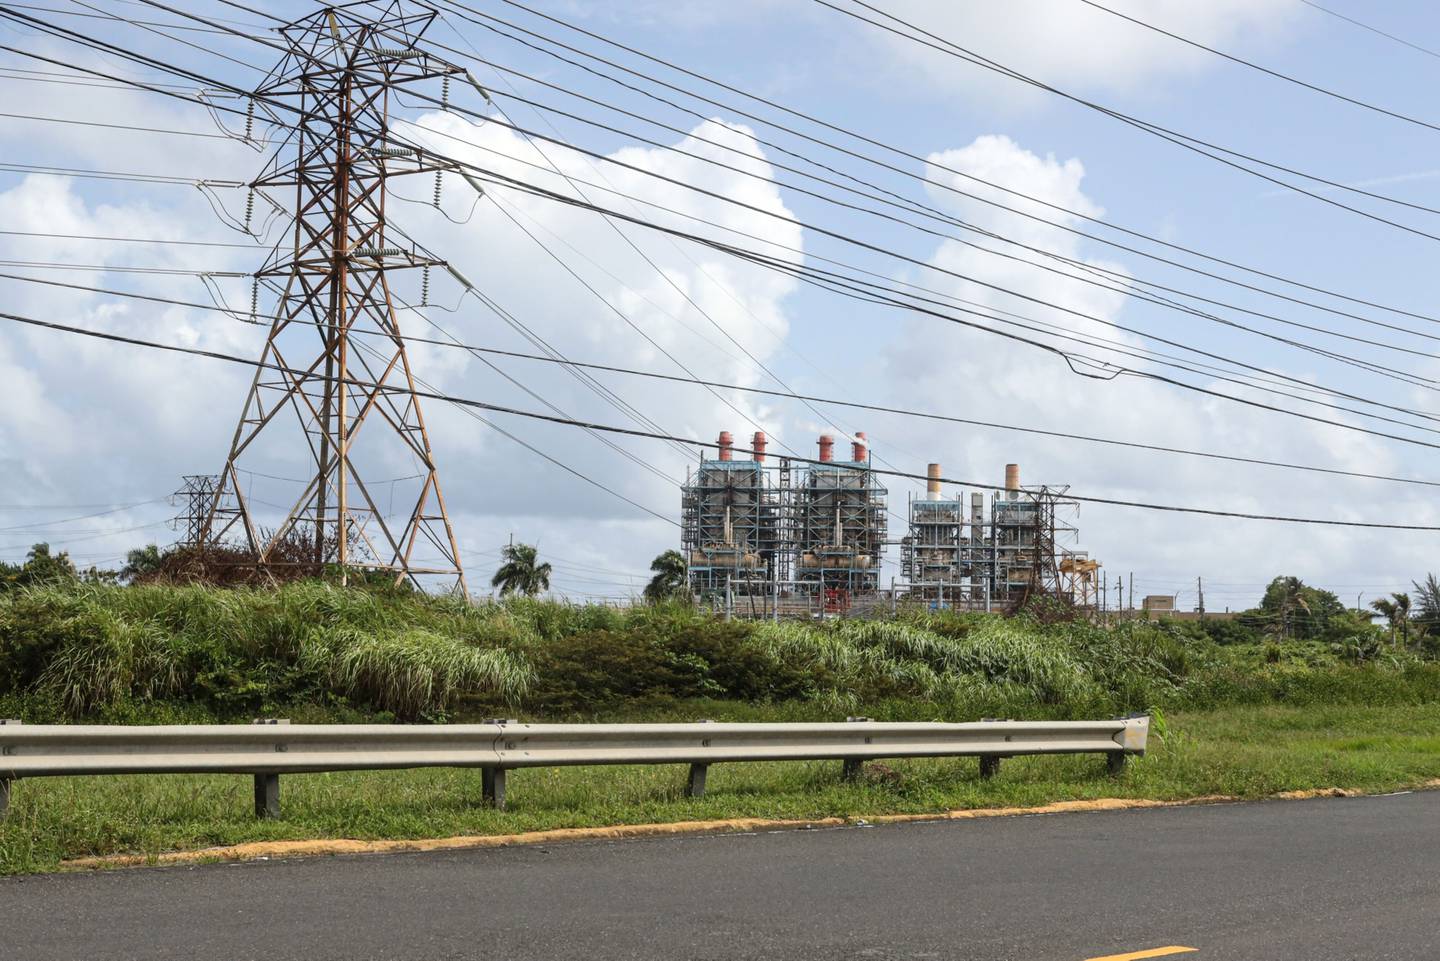 The Puerto Rico Electric Power Authority Palo Seco Power Plant in San Juan.dfd